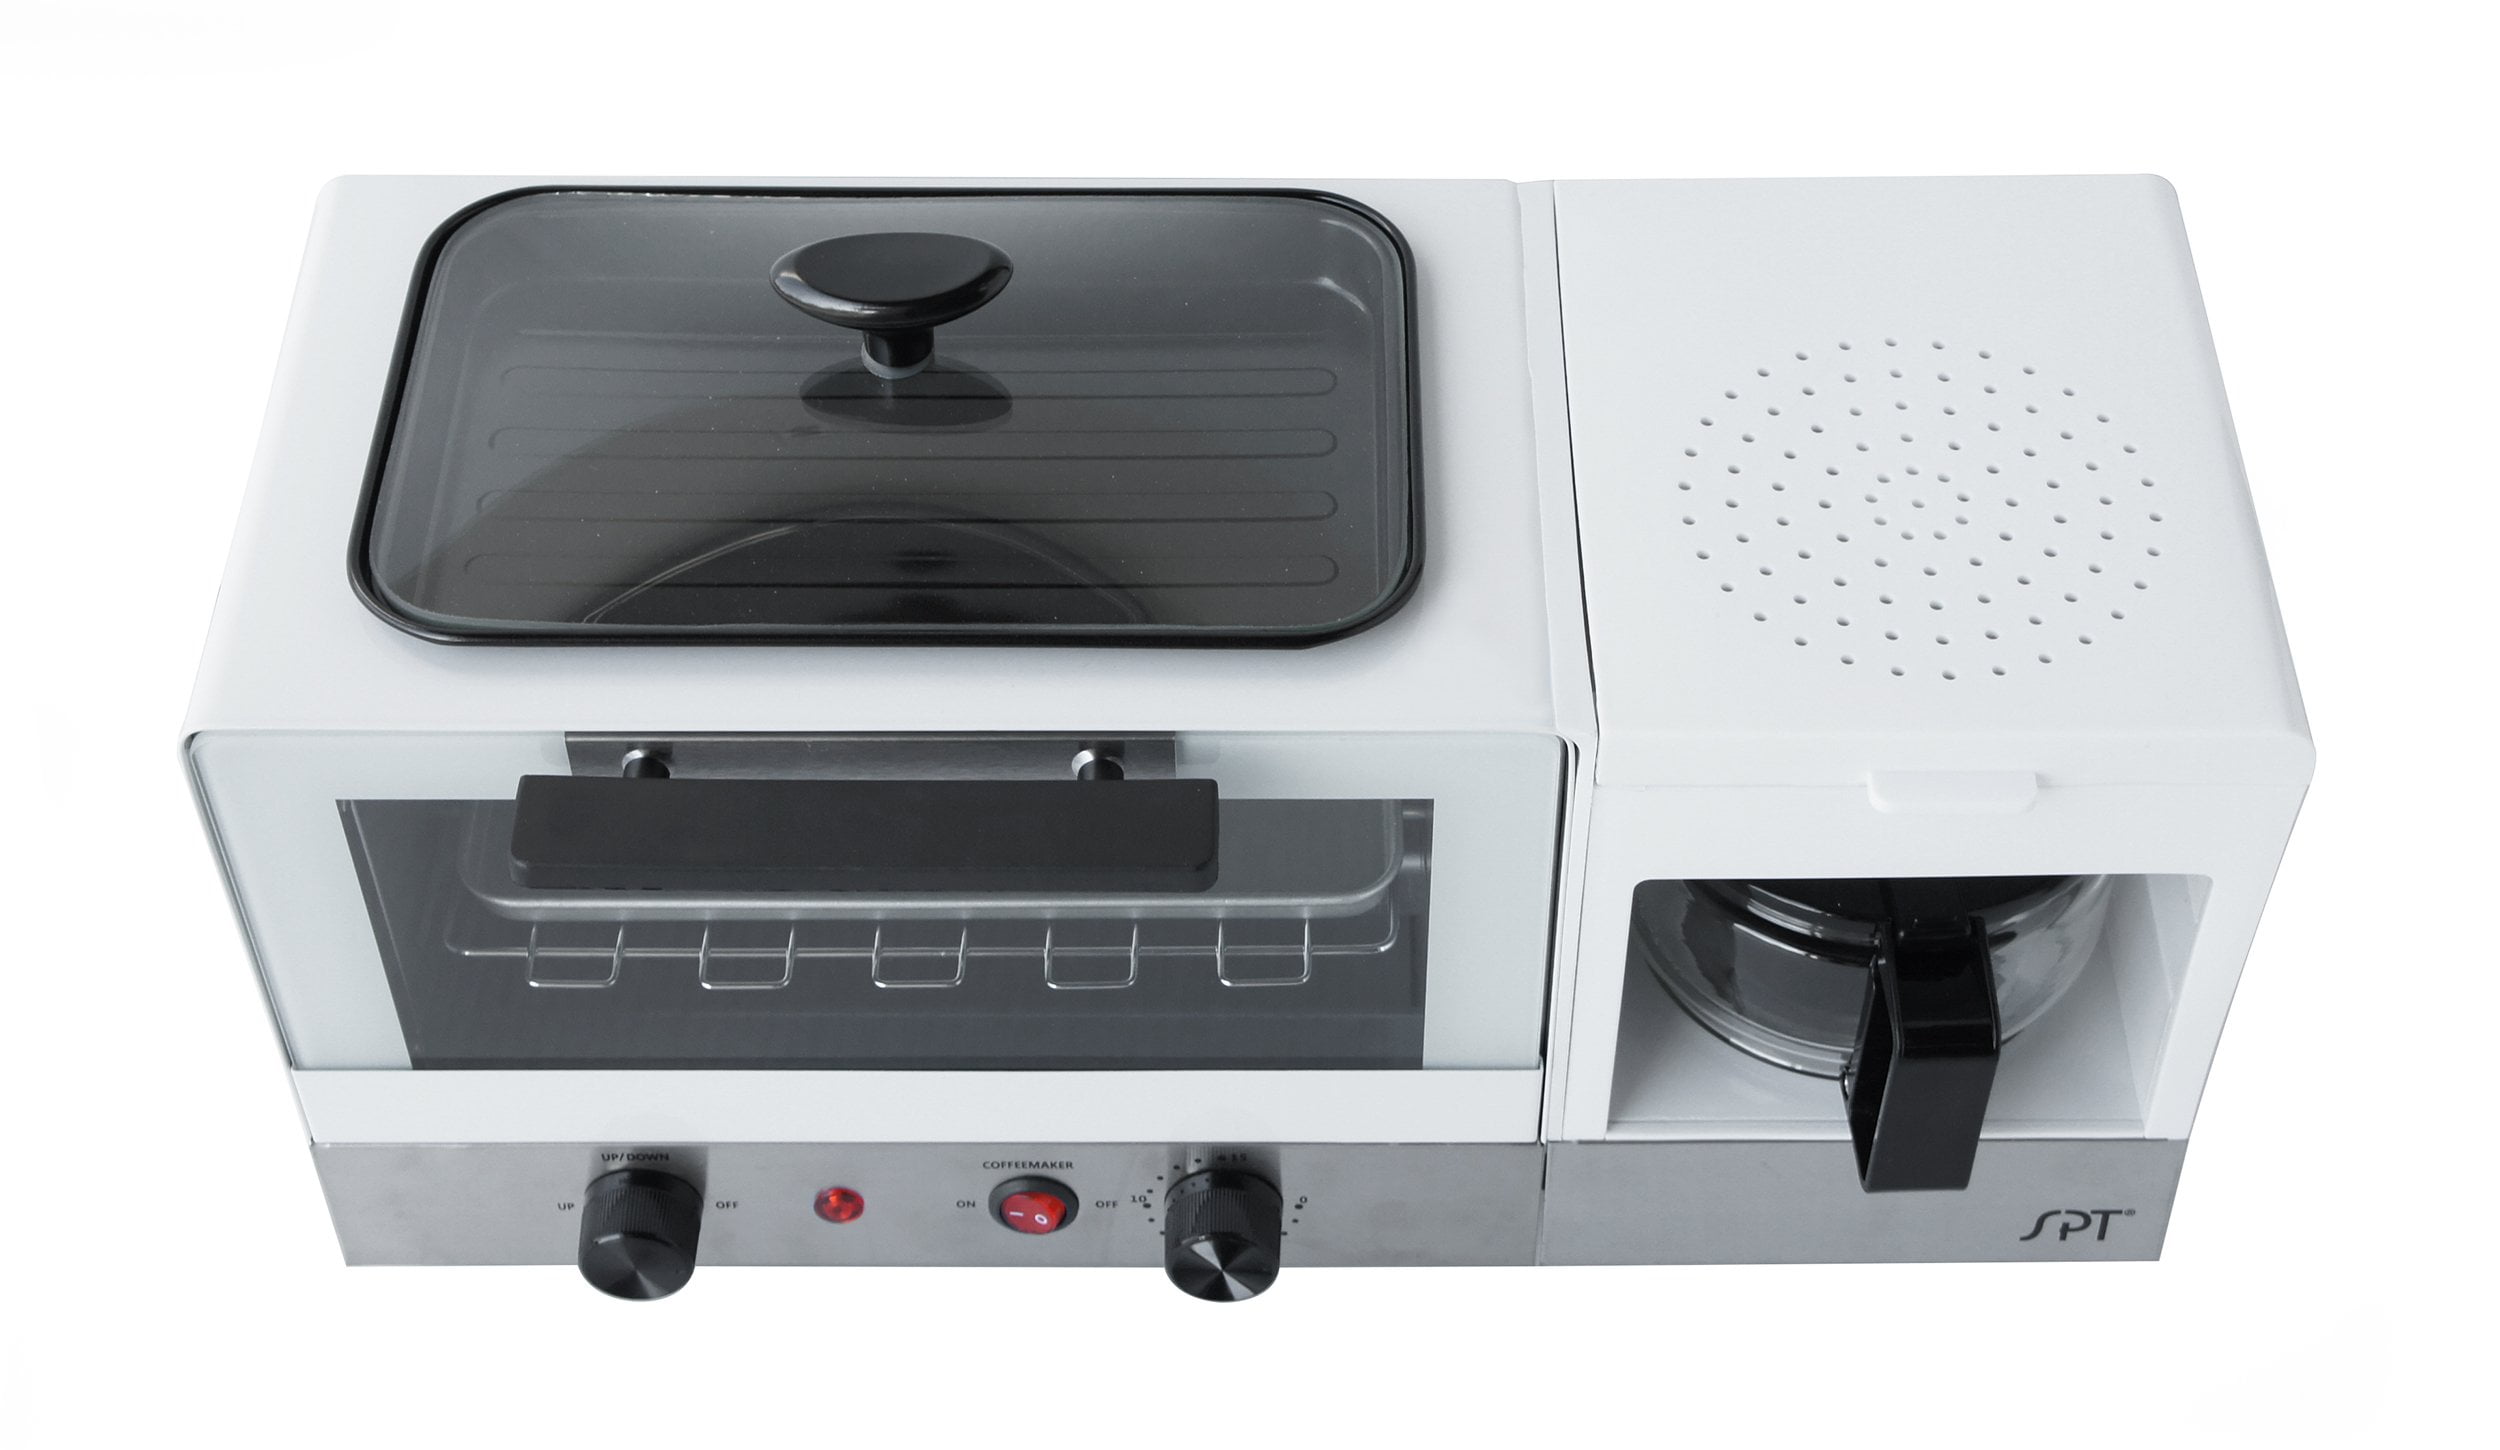 Breakfast Makers, Gourmia GBF470 3 in 1 Breakfast Station - 2 Slice  Toaster, Egg Cooker and Poacher, Vegetable Steamer, Bacon and Meat Steaming  Tray - One Touch Controls - Stainless Steel